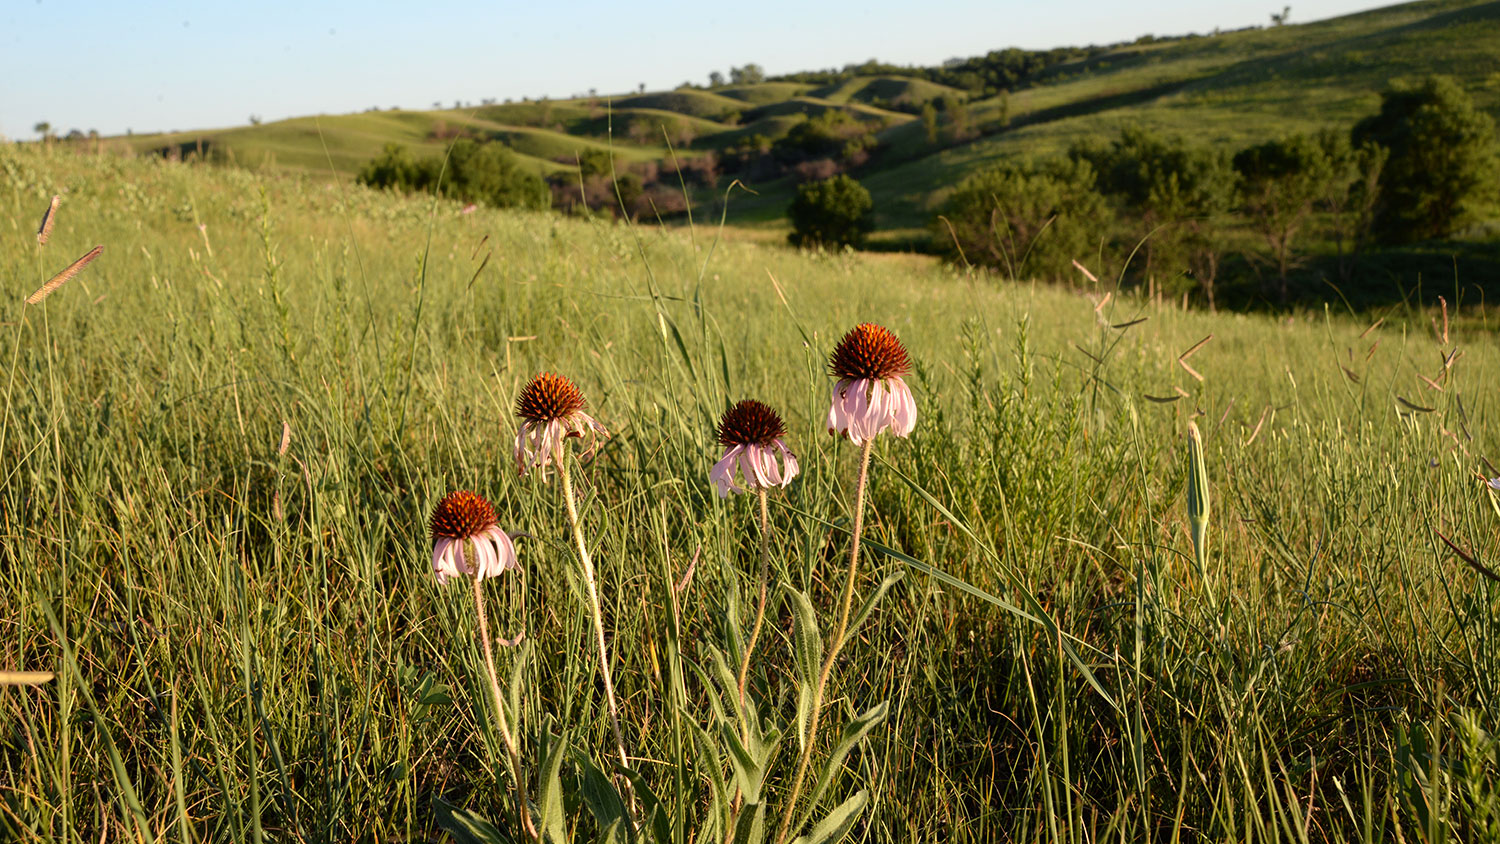 Grasslands with cone flowers in foreground and hills in background